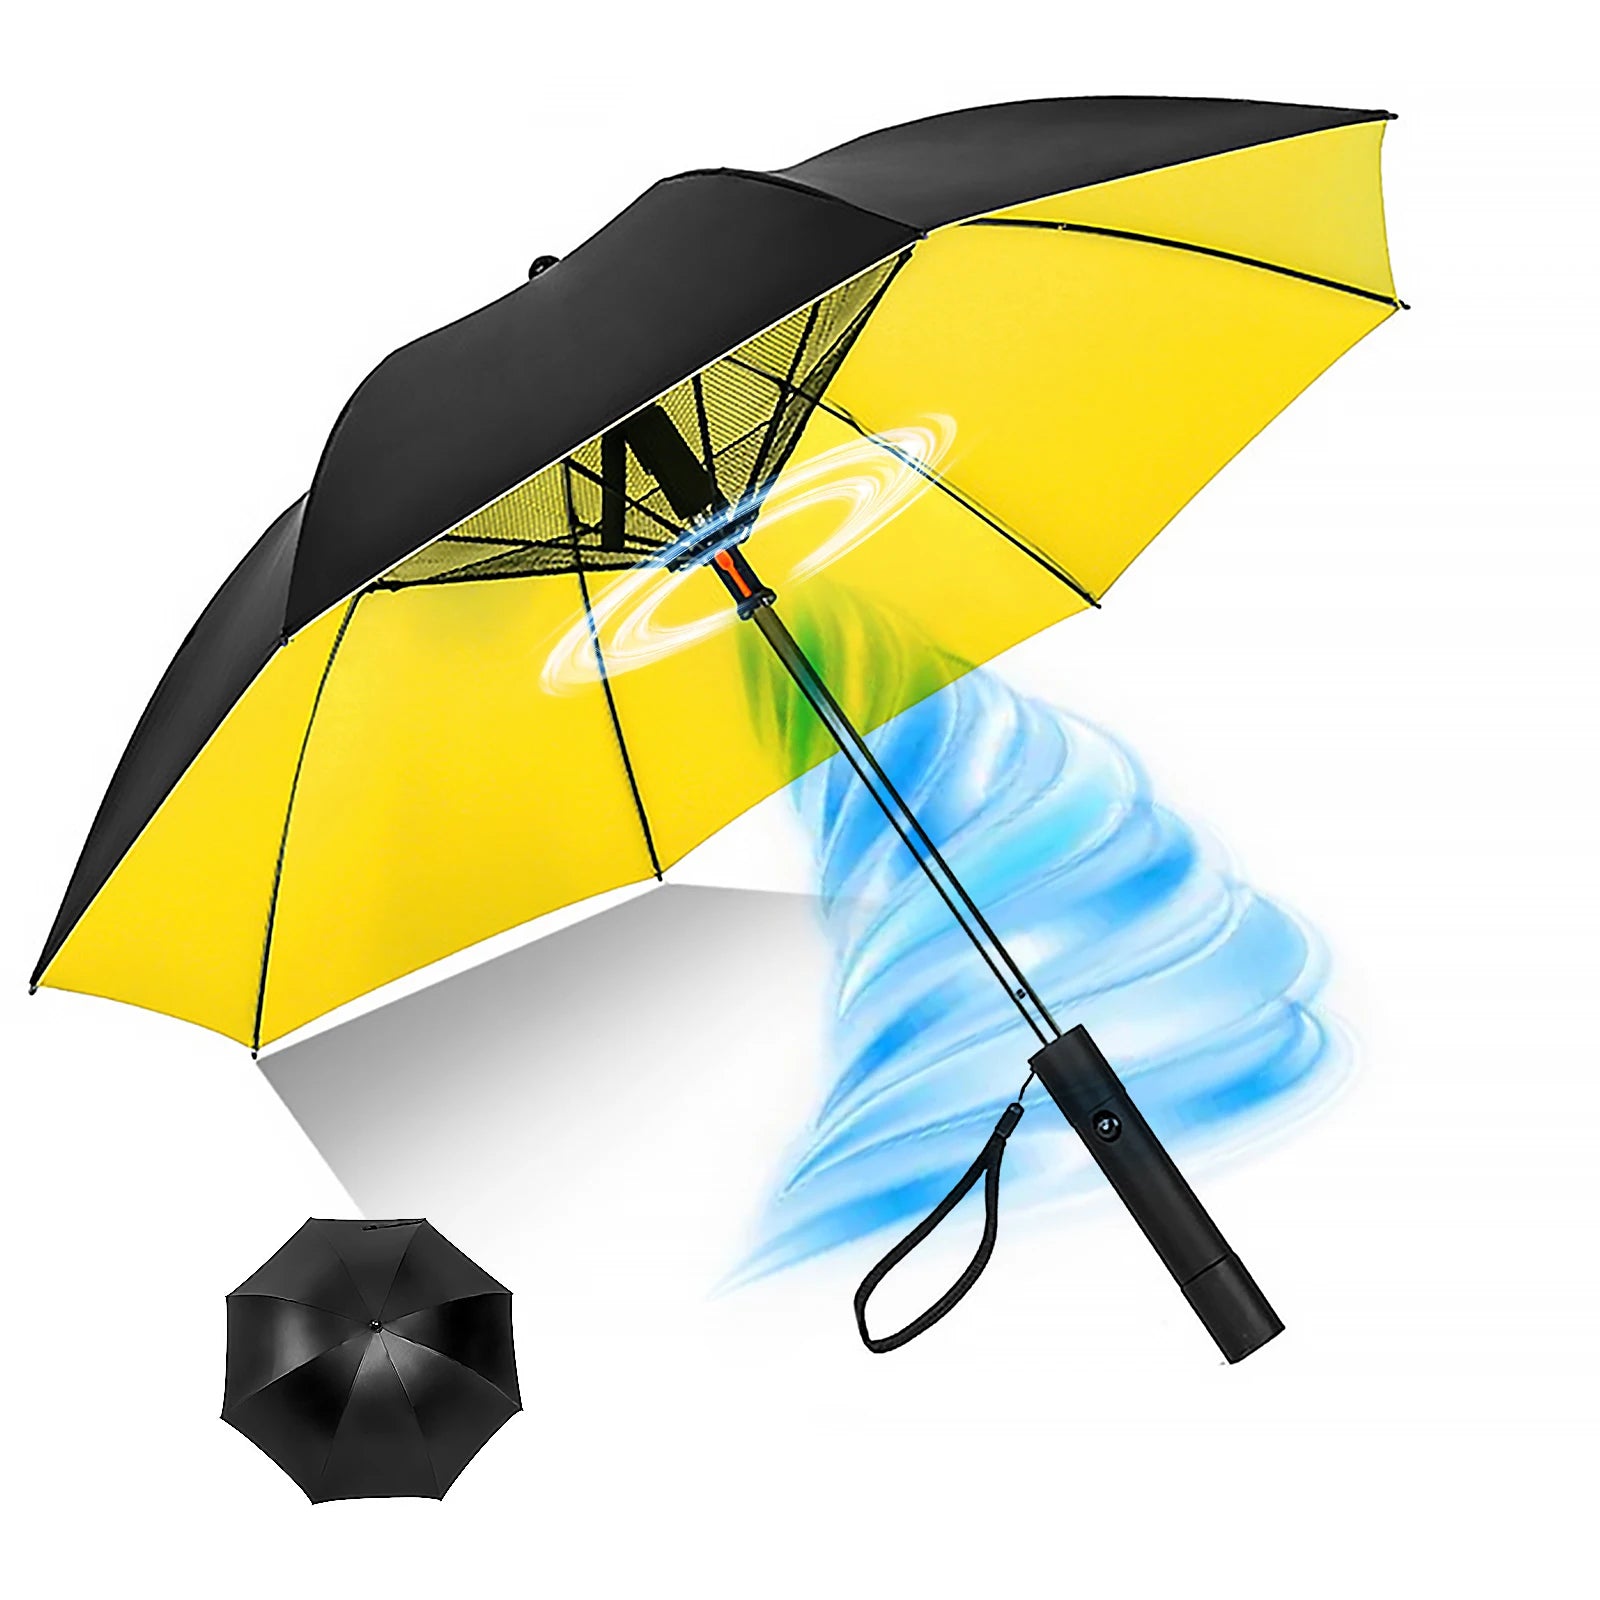 Portable Umbrella with Fan, USB Rechargeable, Powerful Wind Design, Sleek Black and Yellow Color Scheme